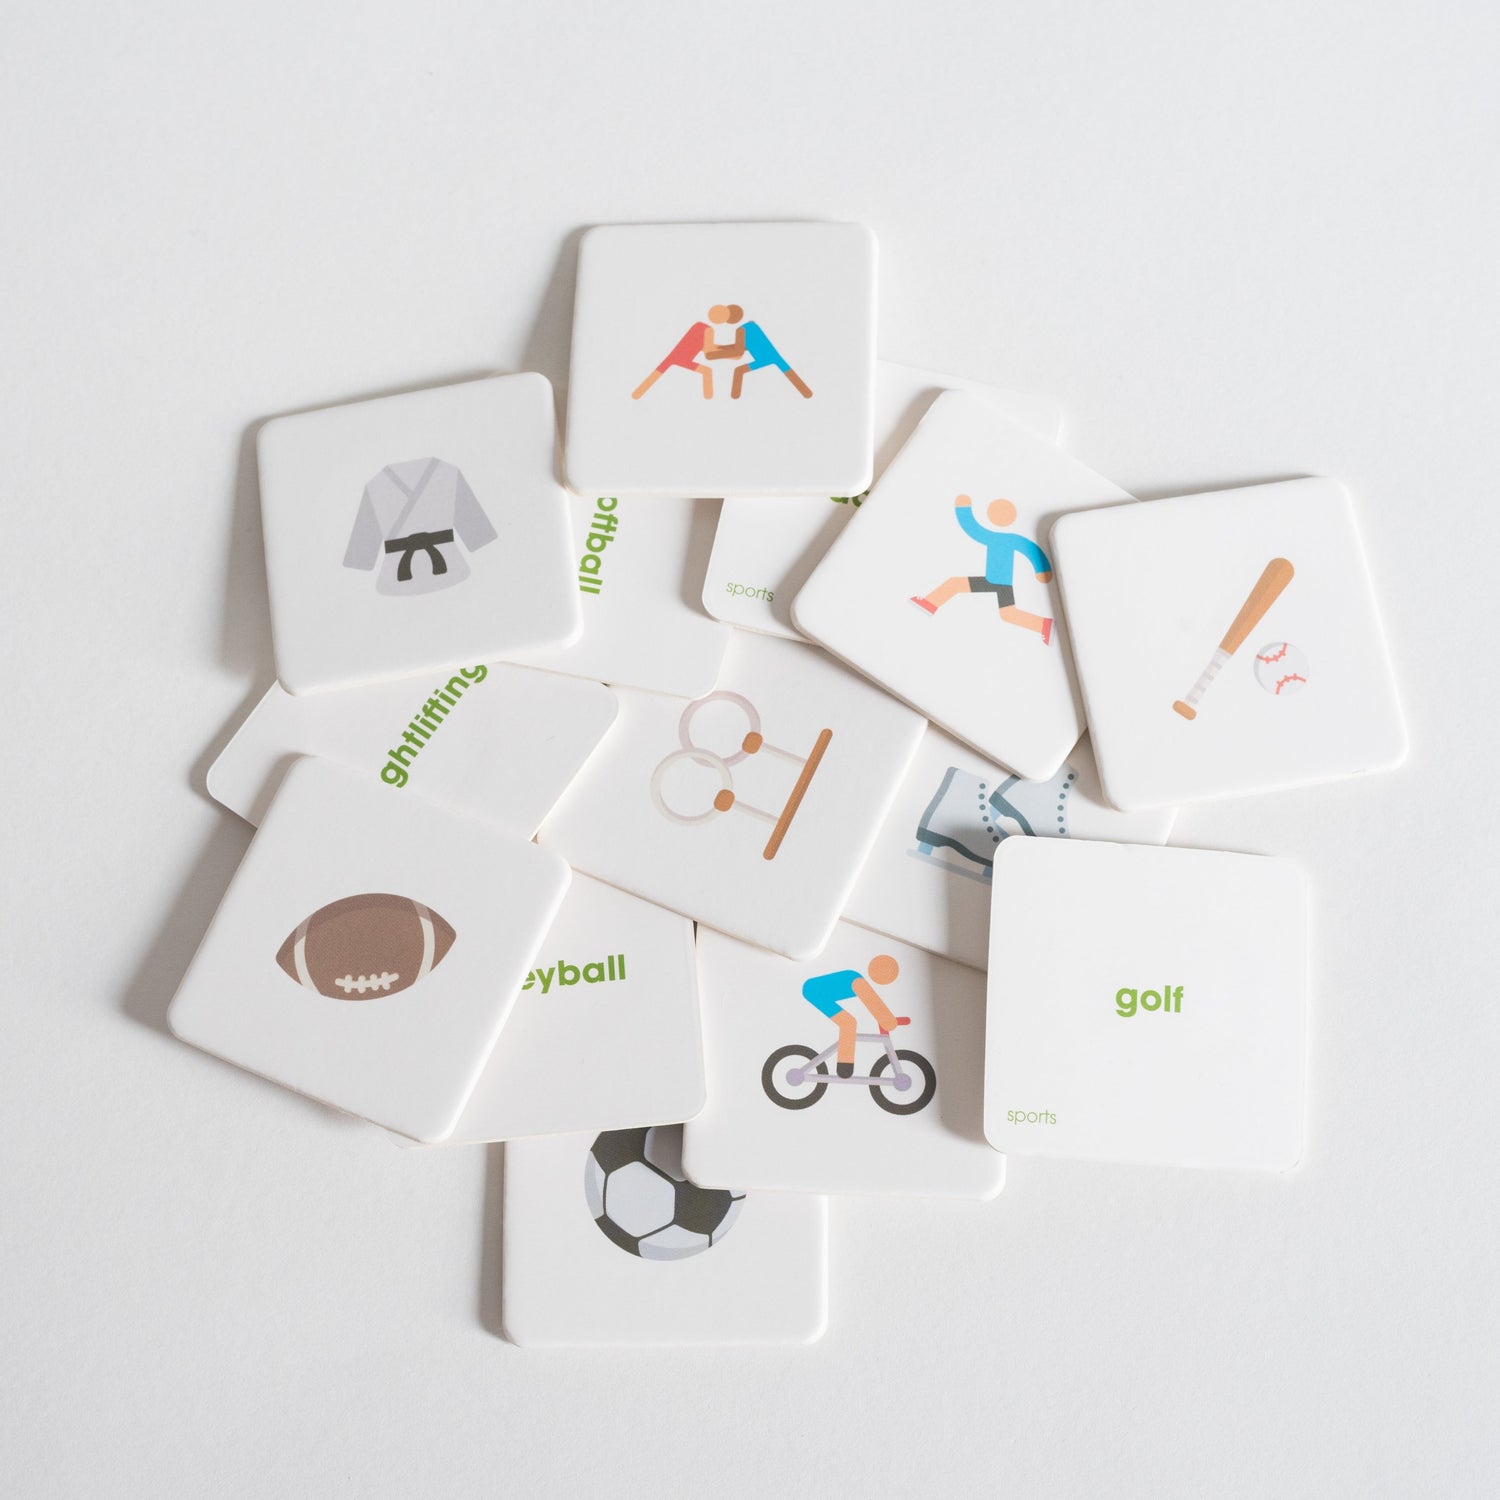 Sports Pack tiles arranged loosely in a pile on white background